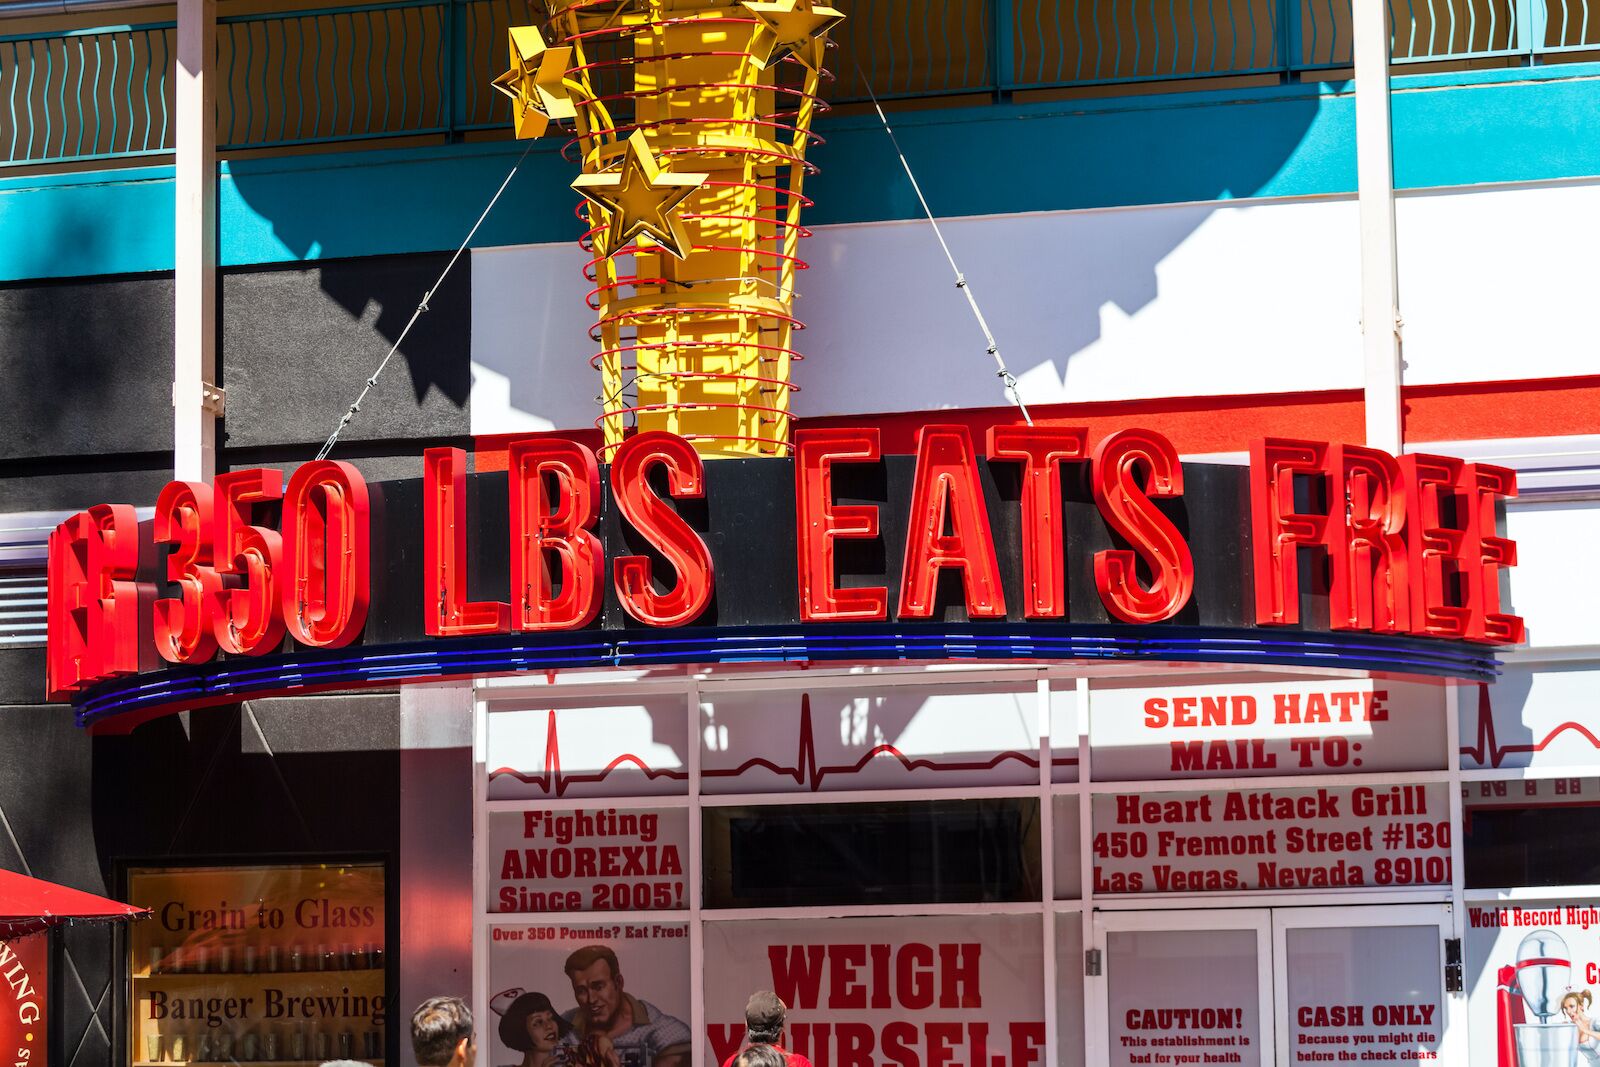 heart-attack-grill-eat-free-sign-exterior